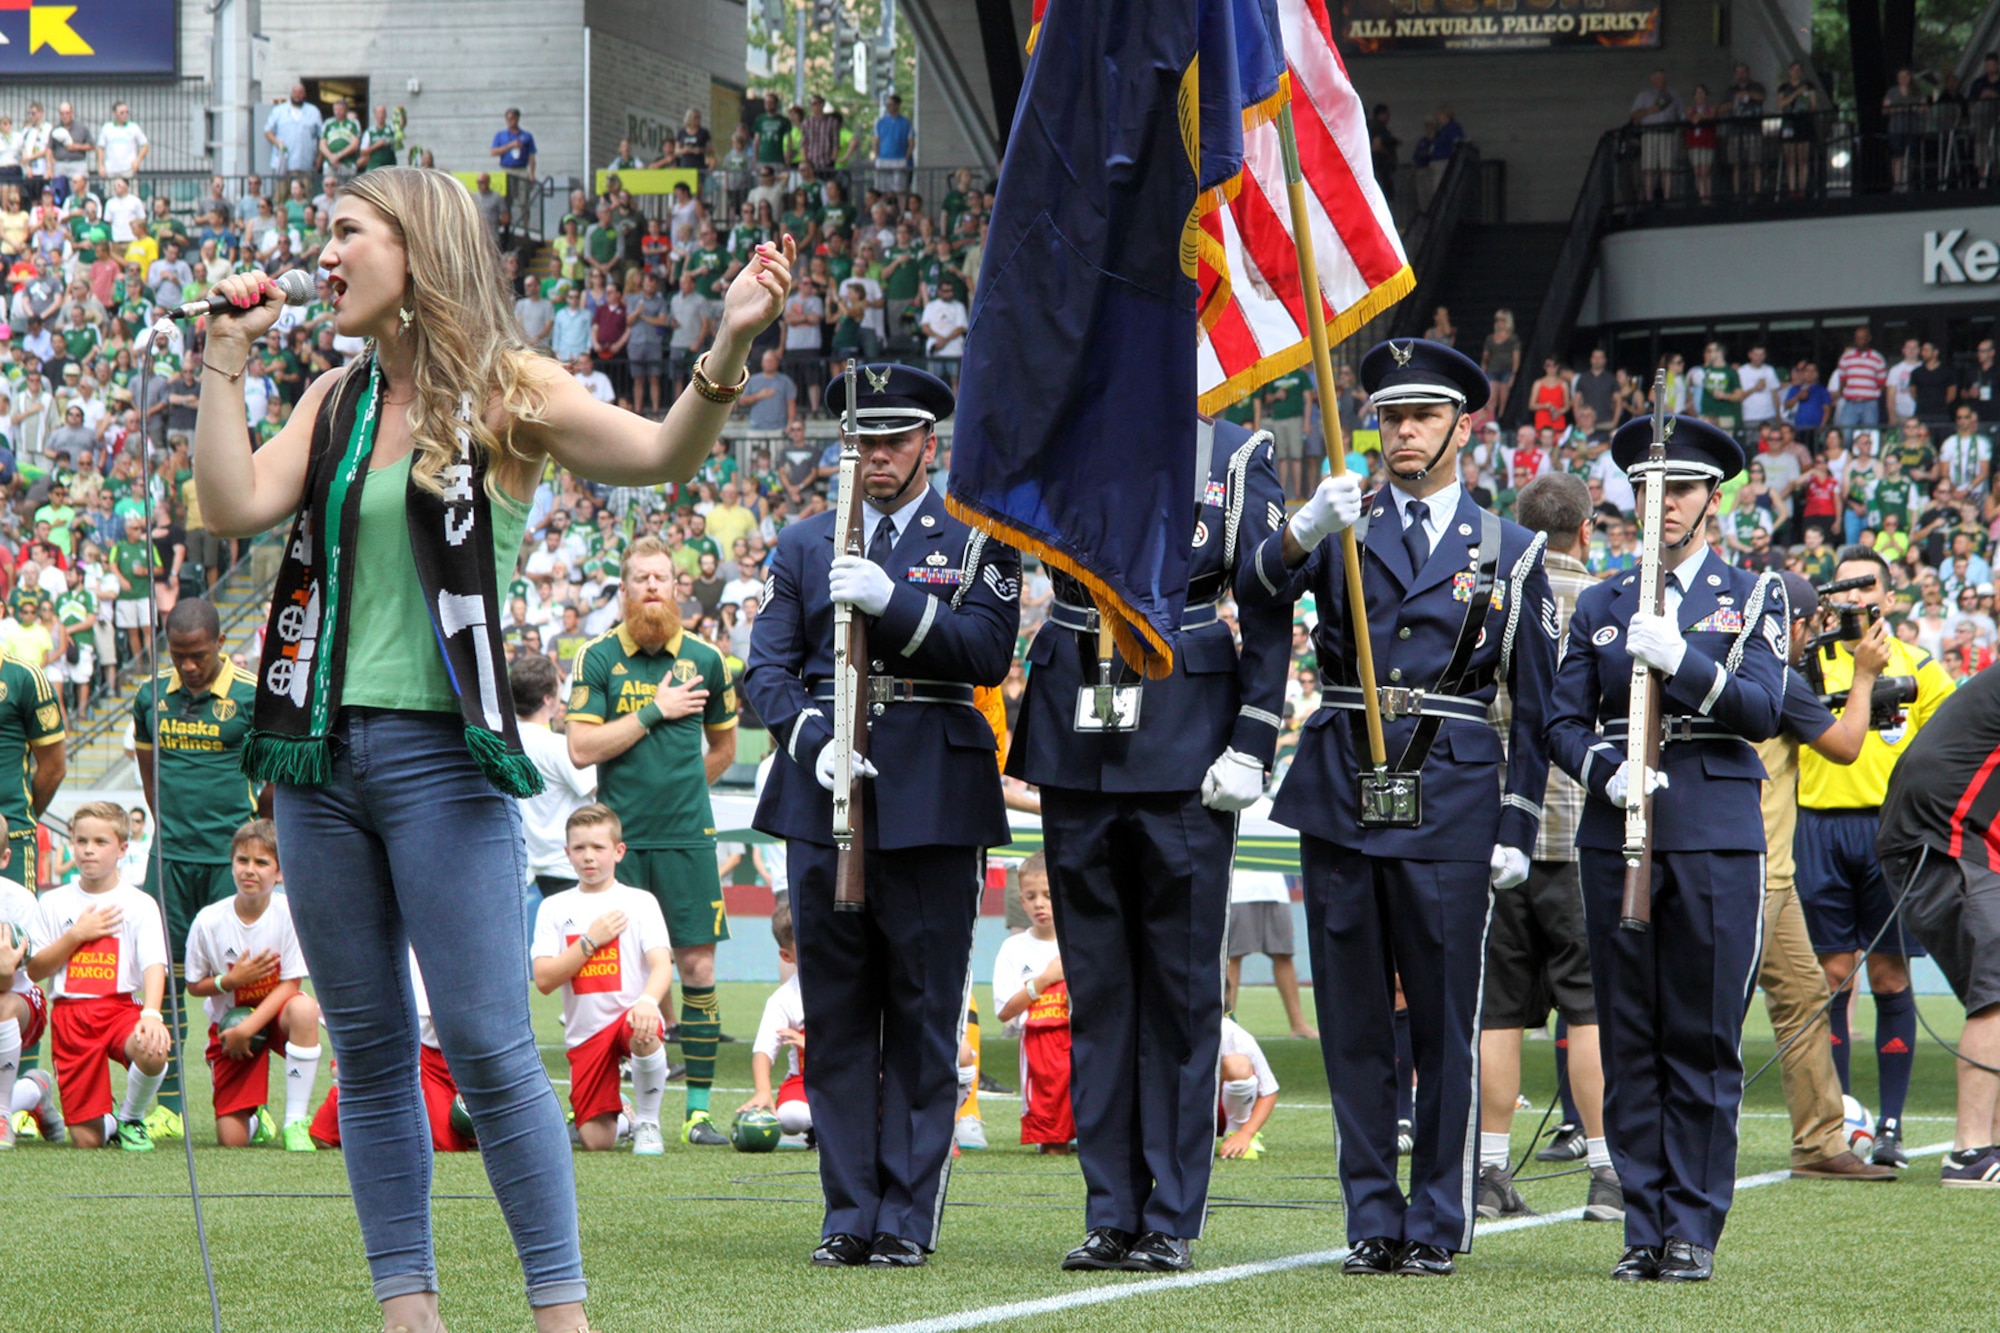 Members of the Portland Air National Guard Base Honor Guard team present the colors during the National Anthem sung by Madison Shanley, prior to the kickoff match between the Portland Timbers and Seattle Sounds, at Providence Park, Portland, Ore., June 28, 2015. (U.S. Air National Guard photo by Master Sgt. Shelly Davison, 142nd Fighter Wing Public Affairs/Released)